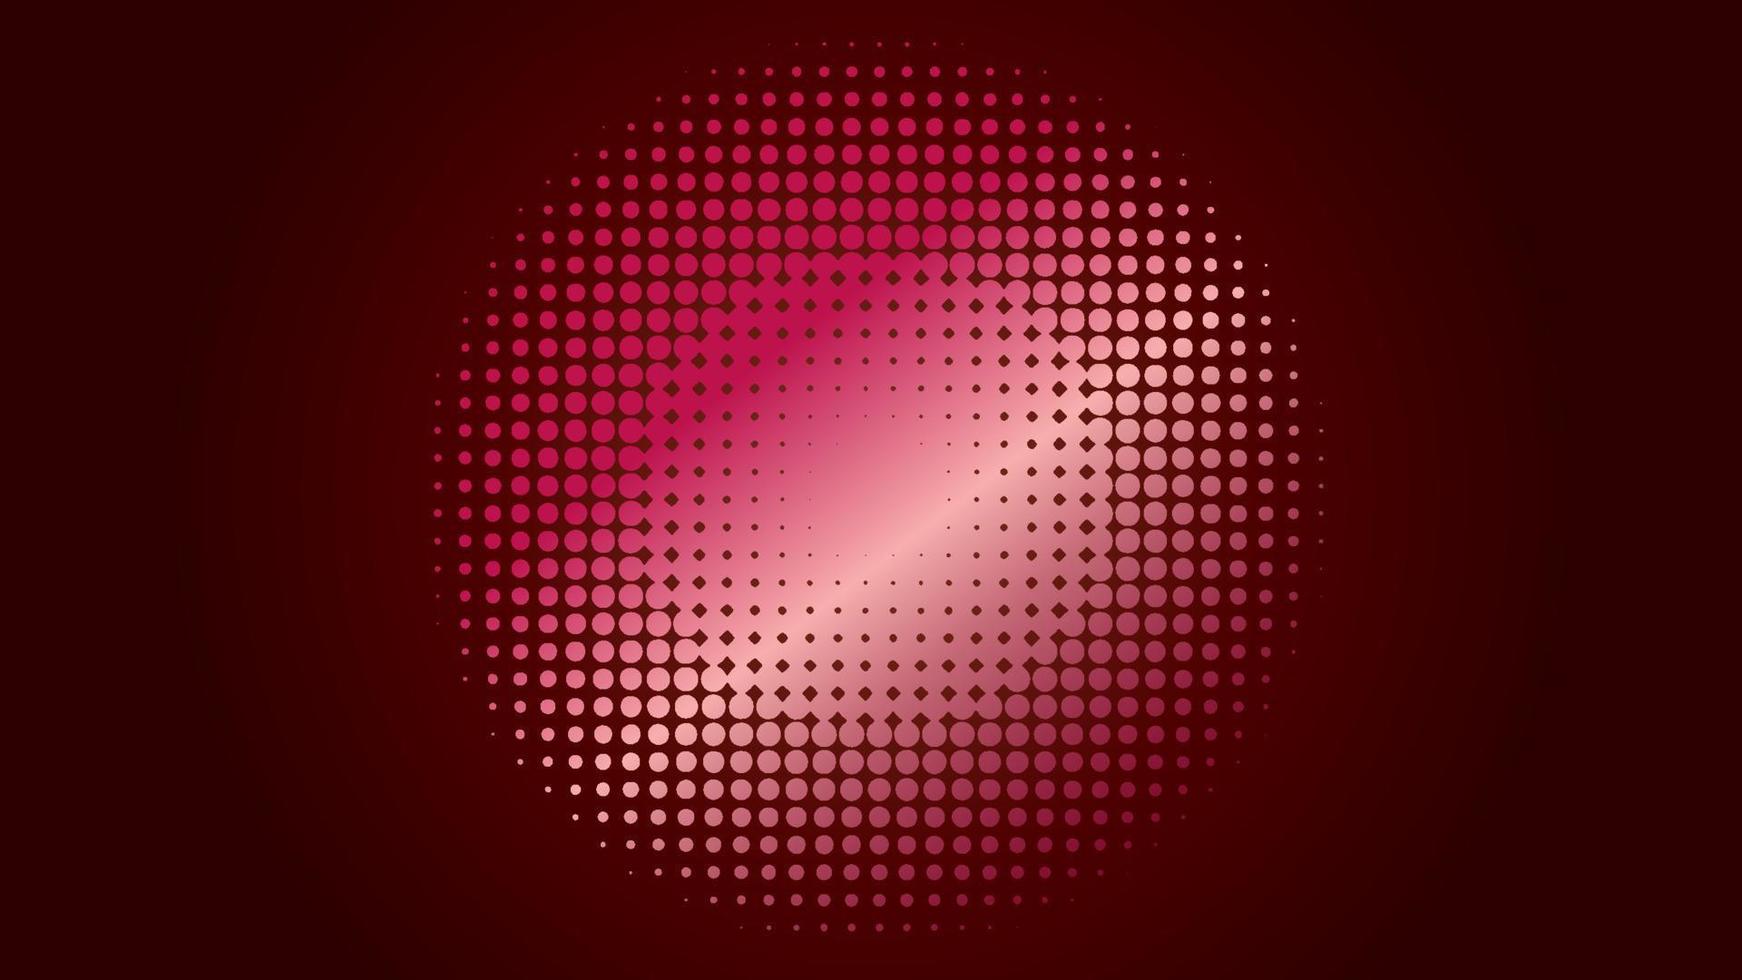 Glossy Radial Halftone Background Design Template, Pop Art, Abstract Shinny Dots Pattern Illustration, Vintage Texture Element, Magenta Pink Maroon Gold Gradient, Polka-dotted, polkadot vector